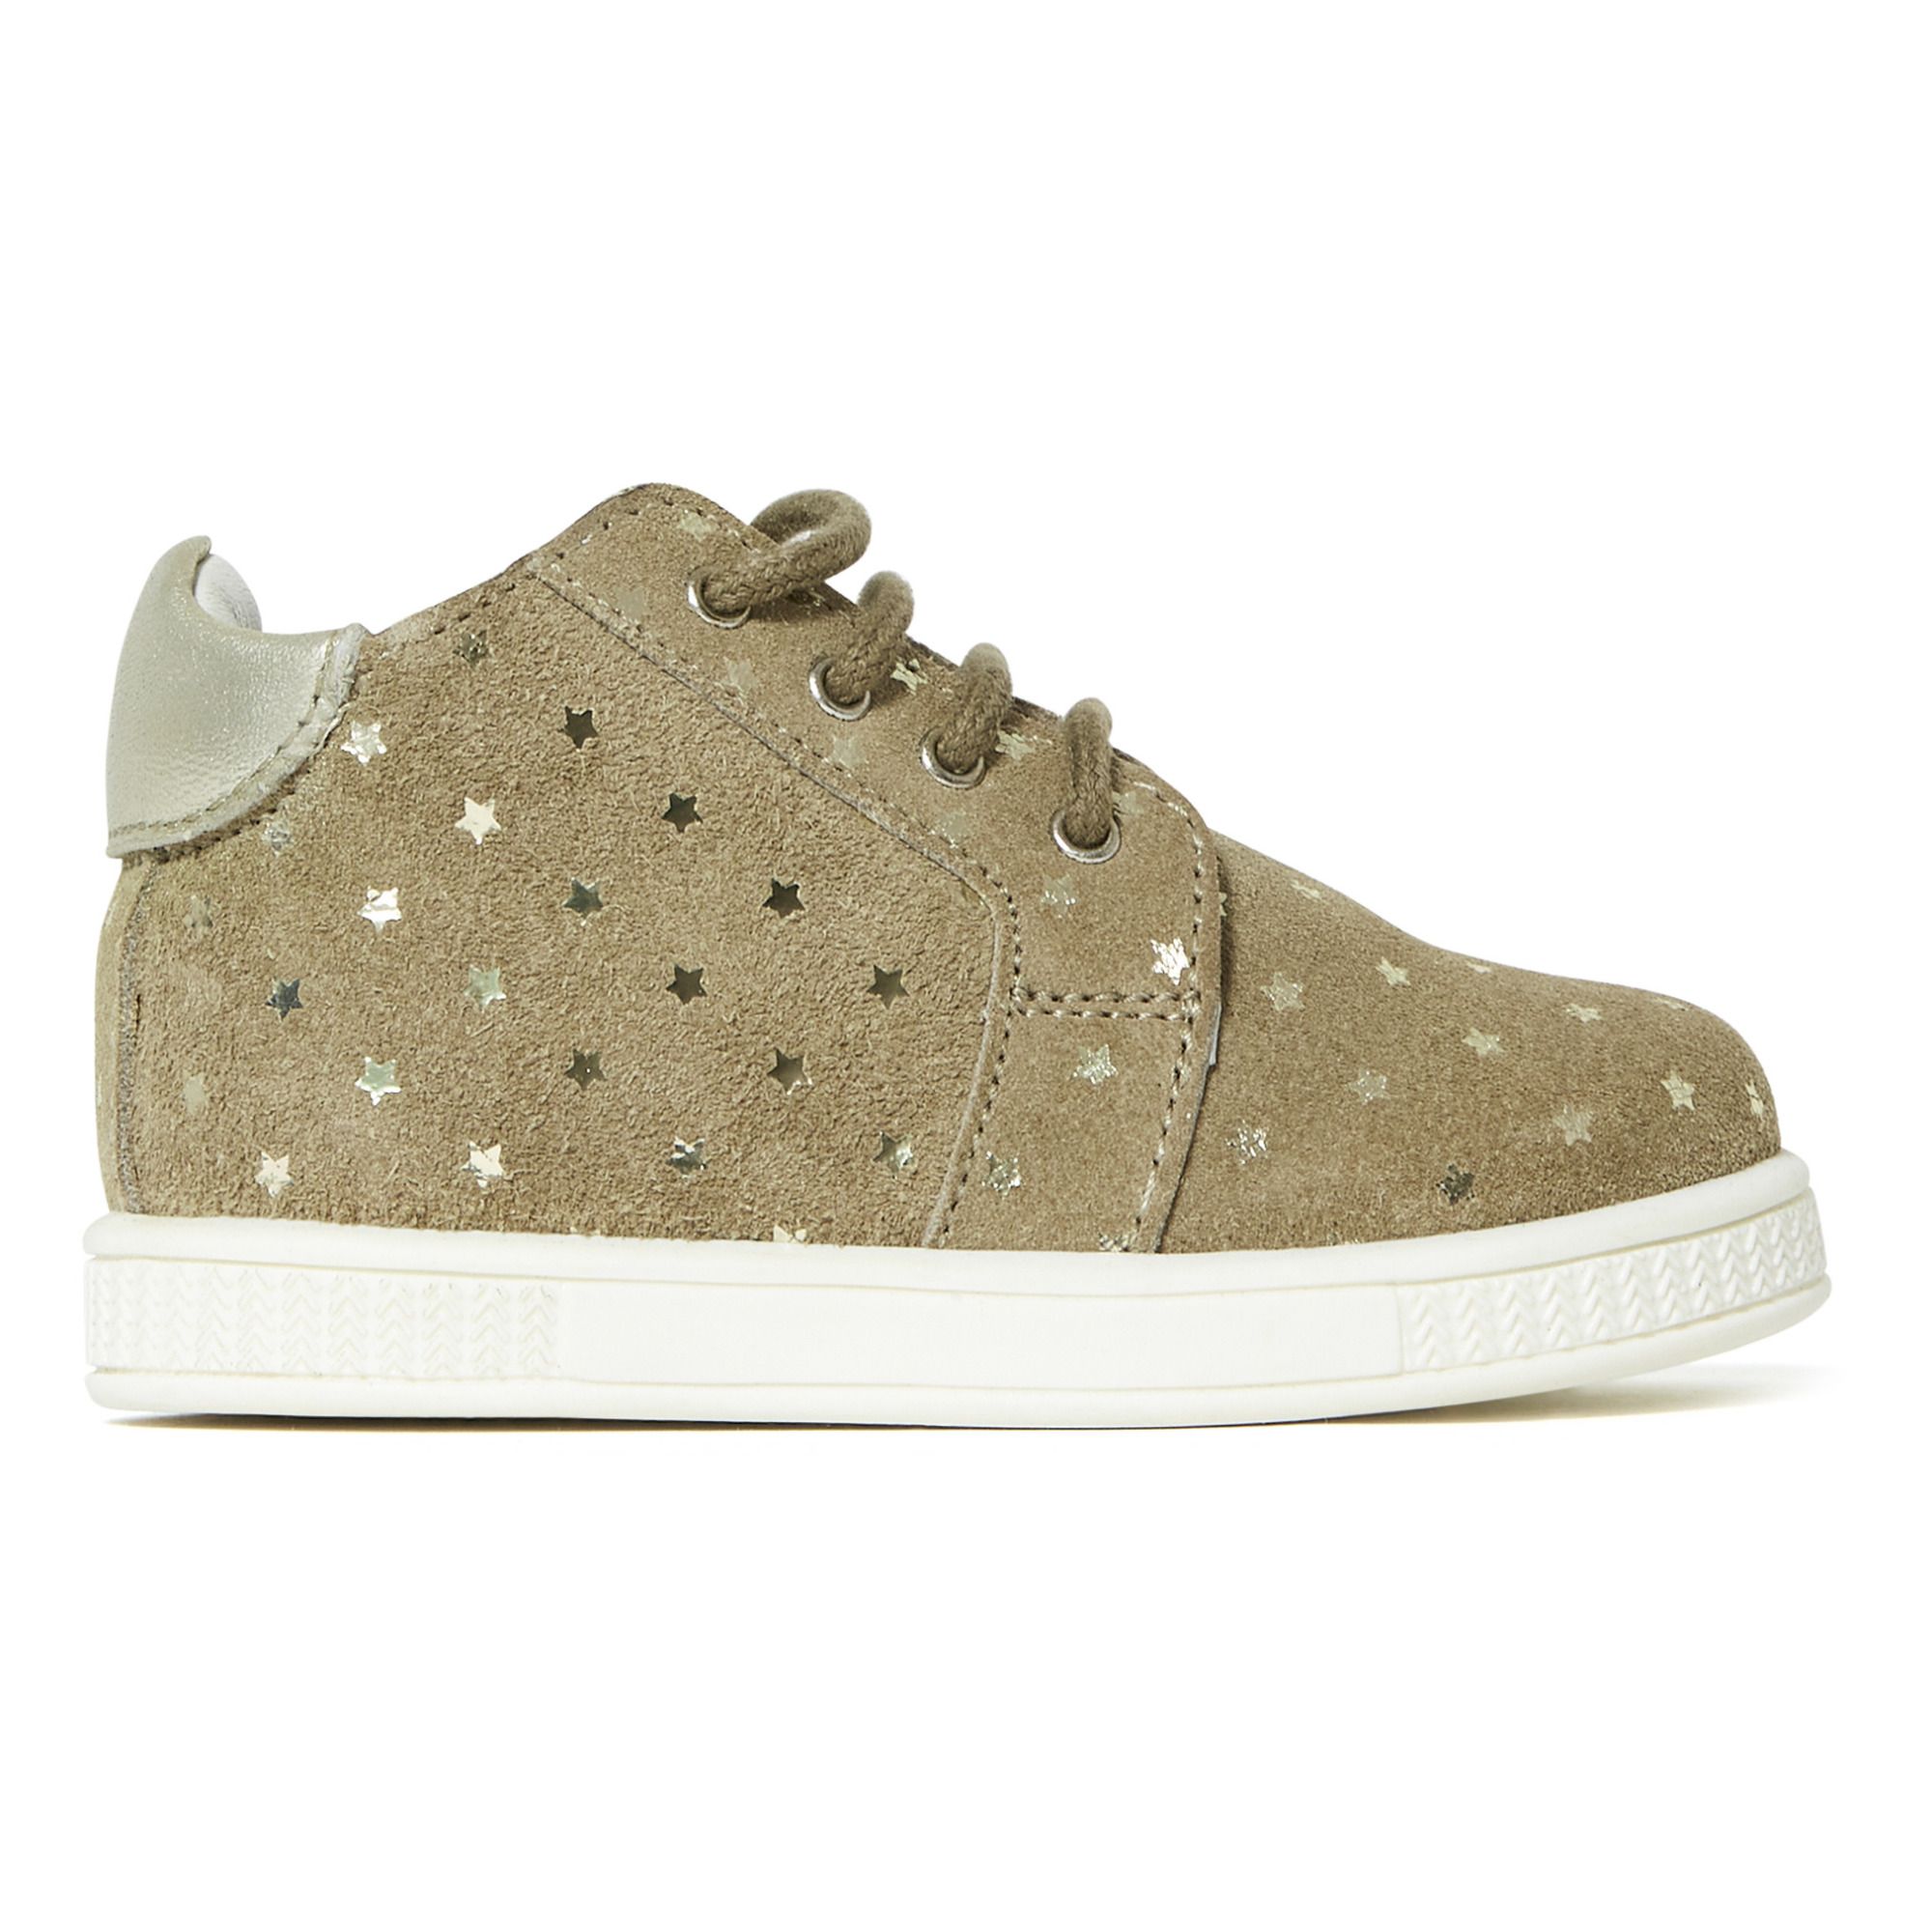 trainers with stars on